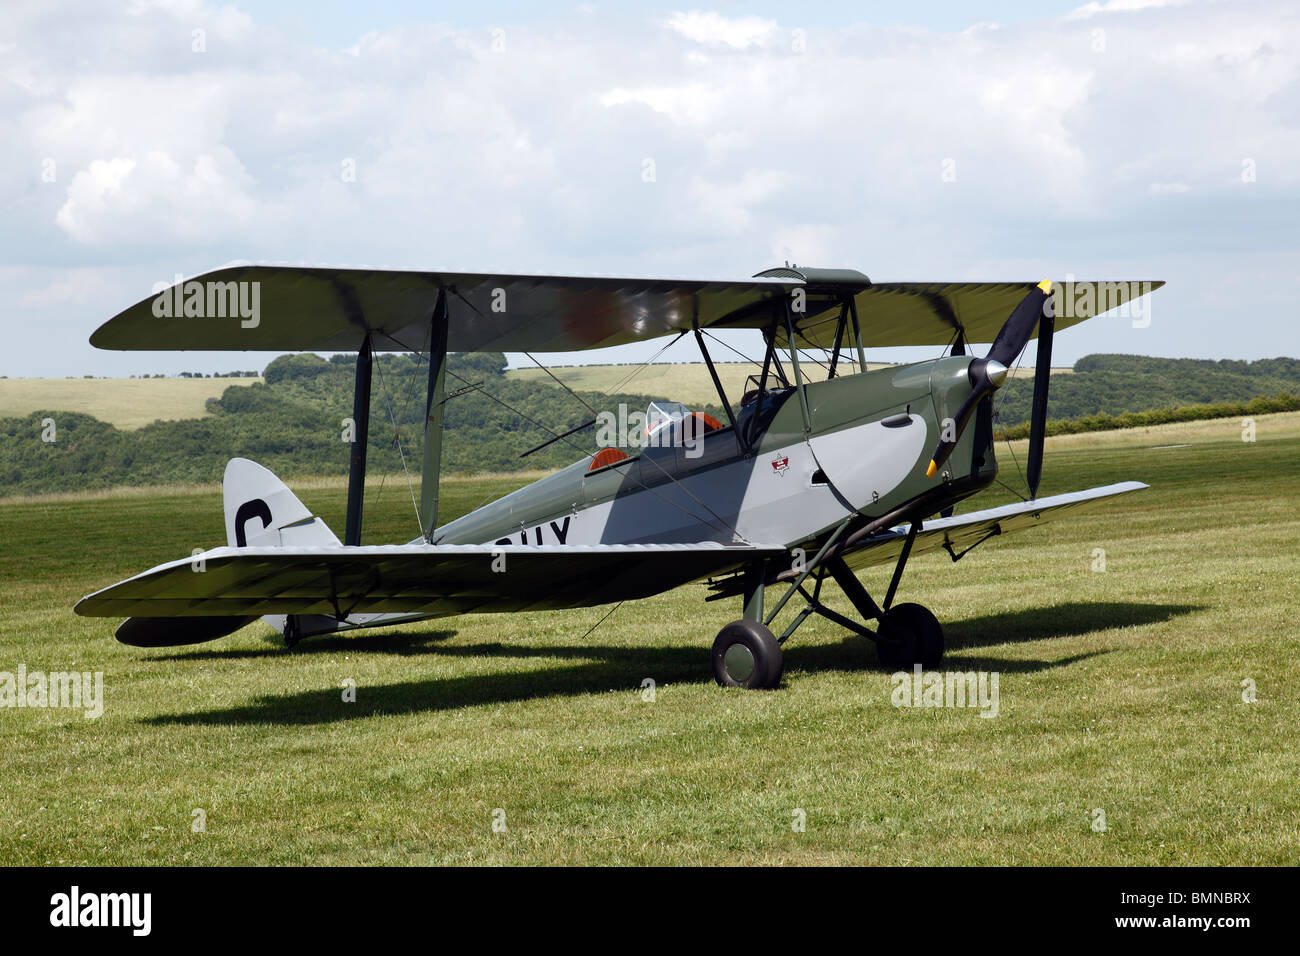 A historic Tiger Moth aeroplane at Compton Abbas airfield in England Stock Photo